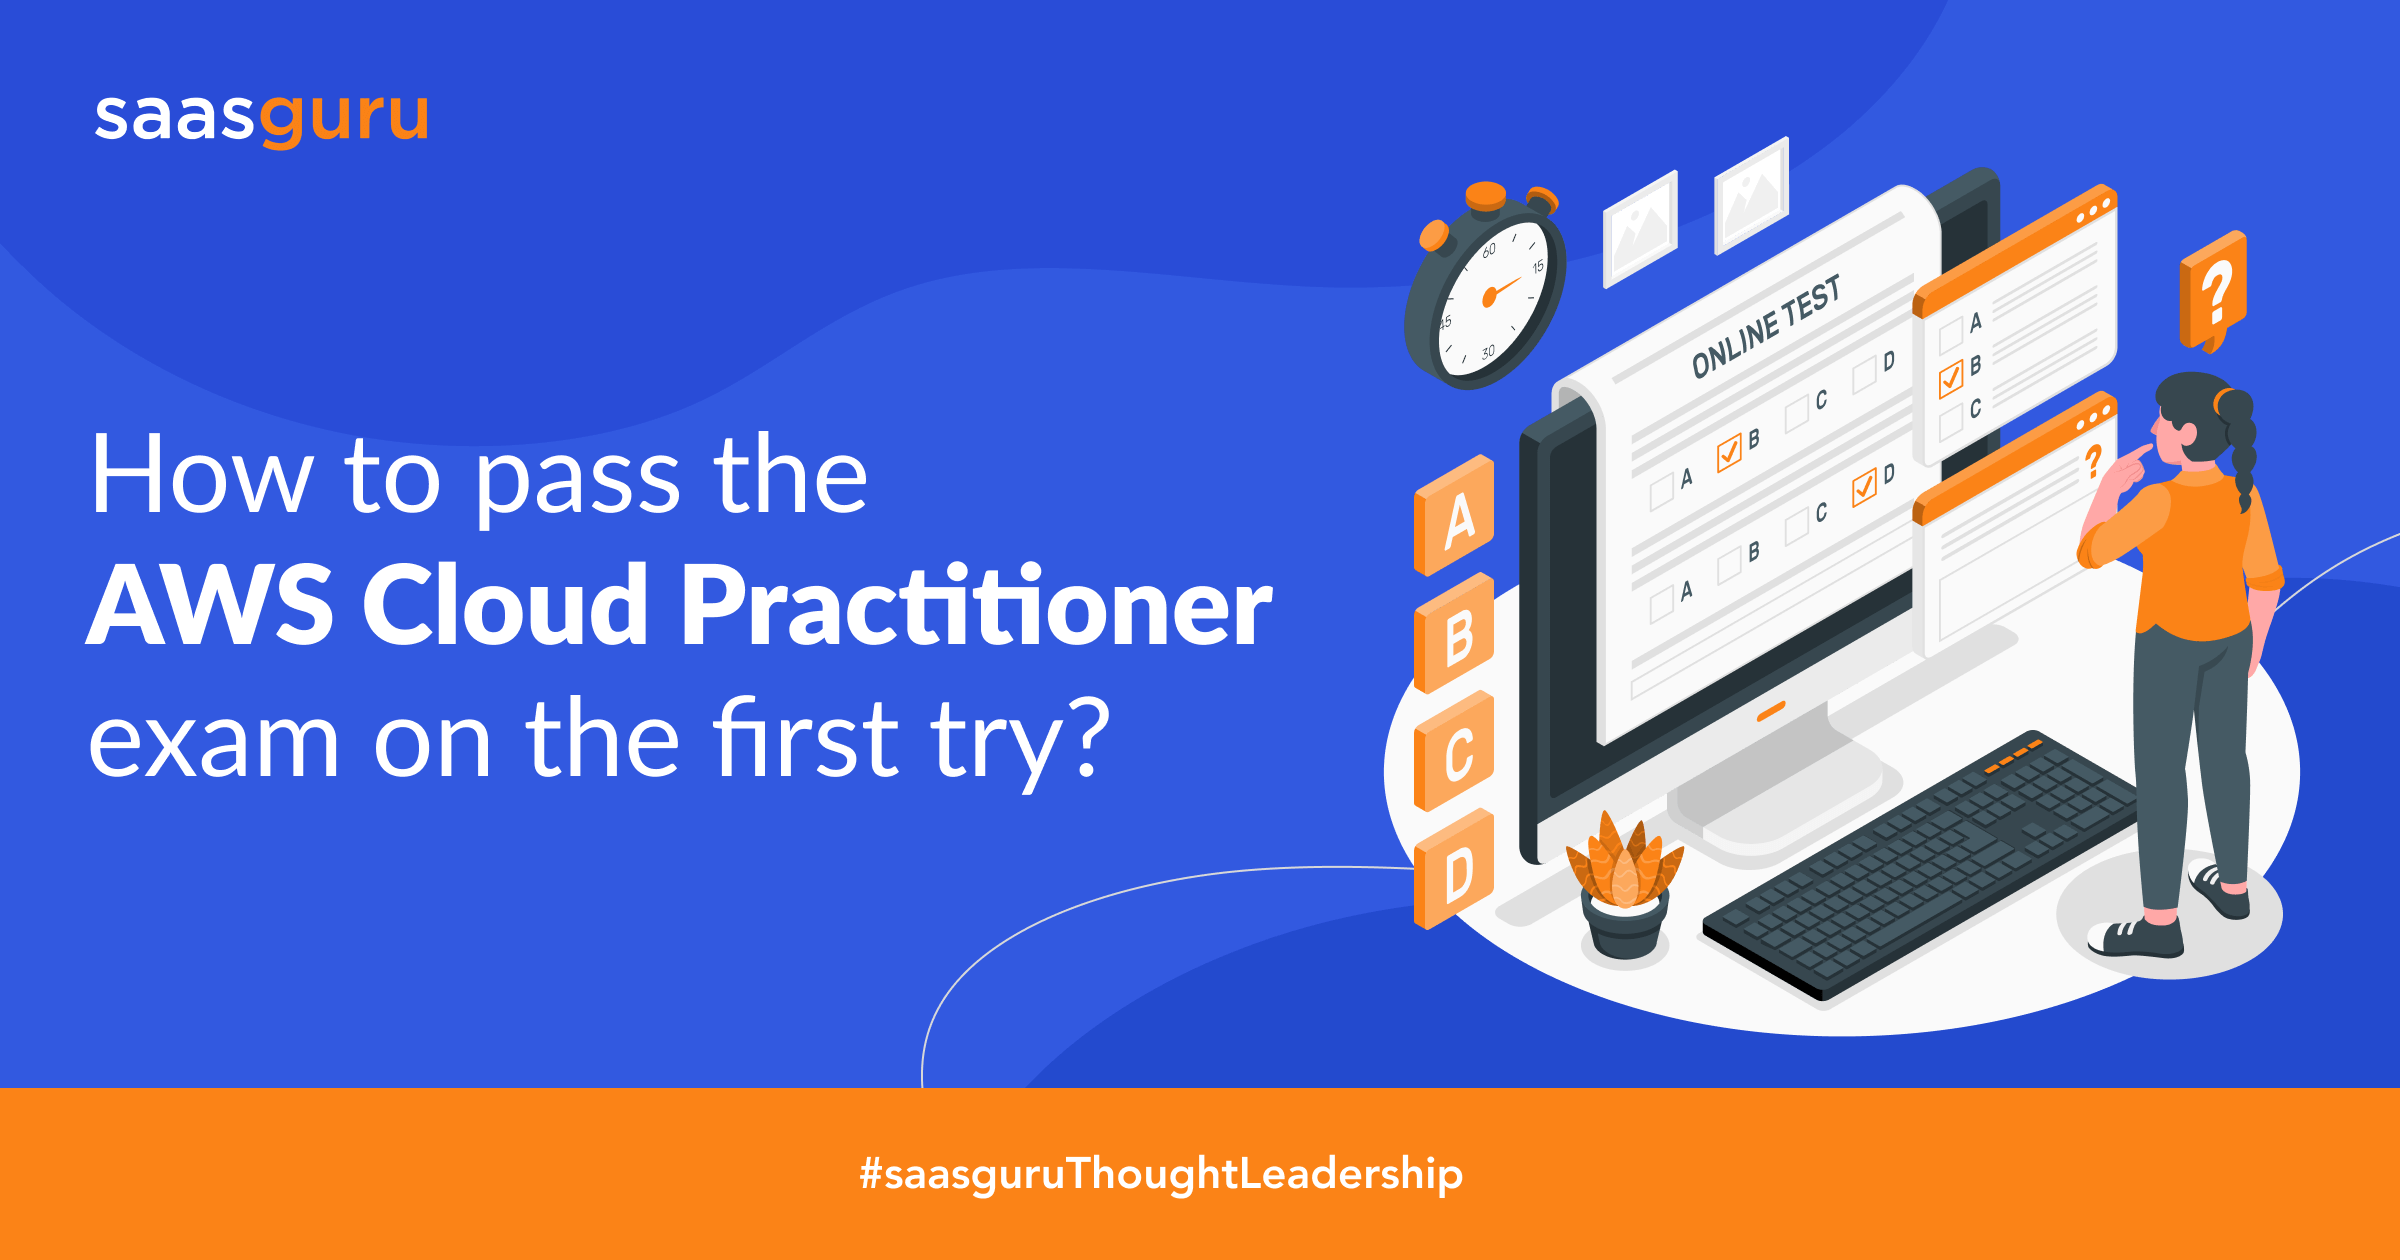 How to Pass AWS Cloud Practitioner Exam in the 1st Try?